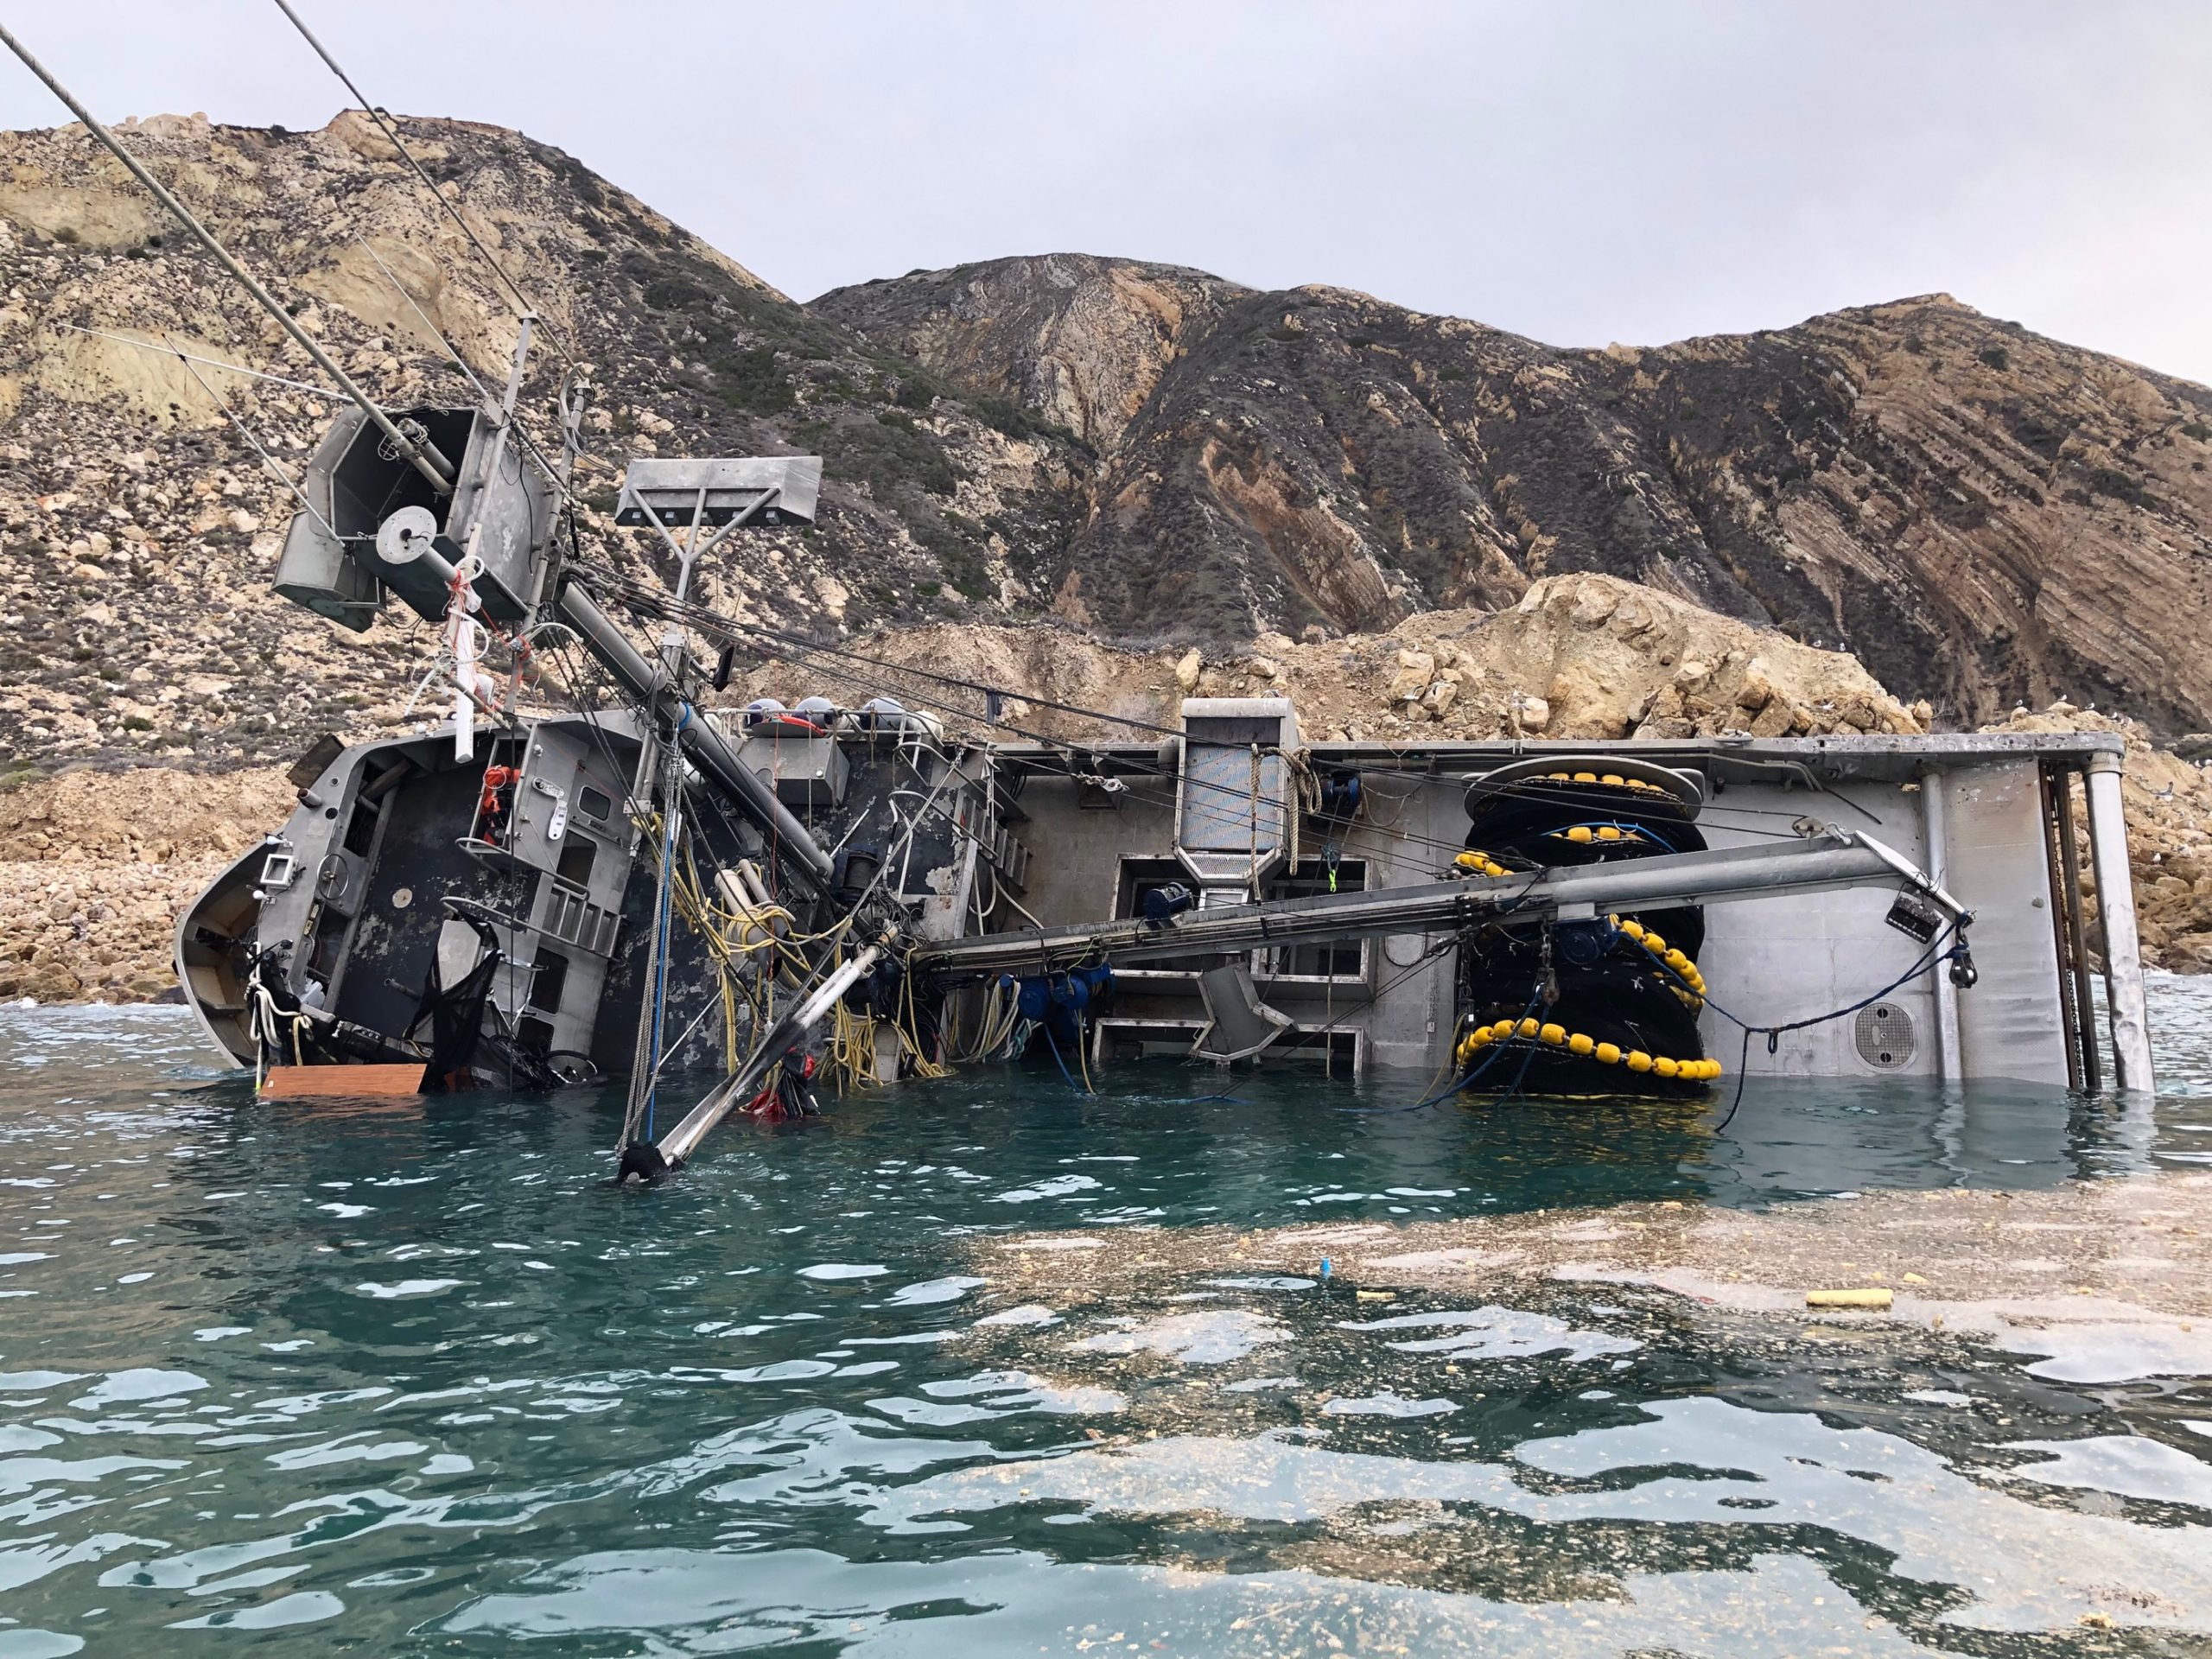 Salvage Continues for Grounded Fishing Vessel on Santa Cruz Island